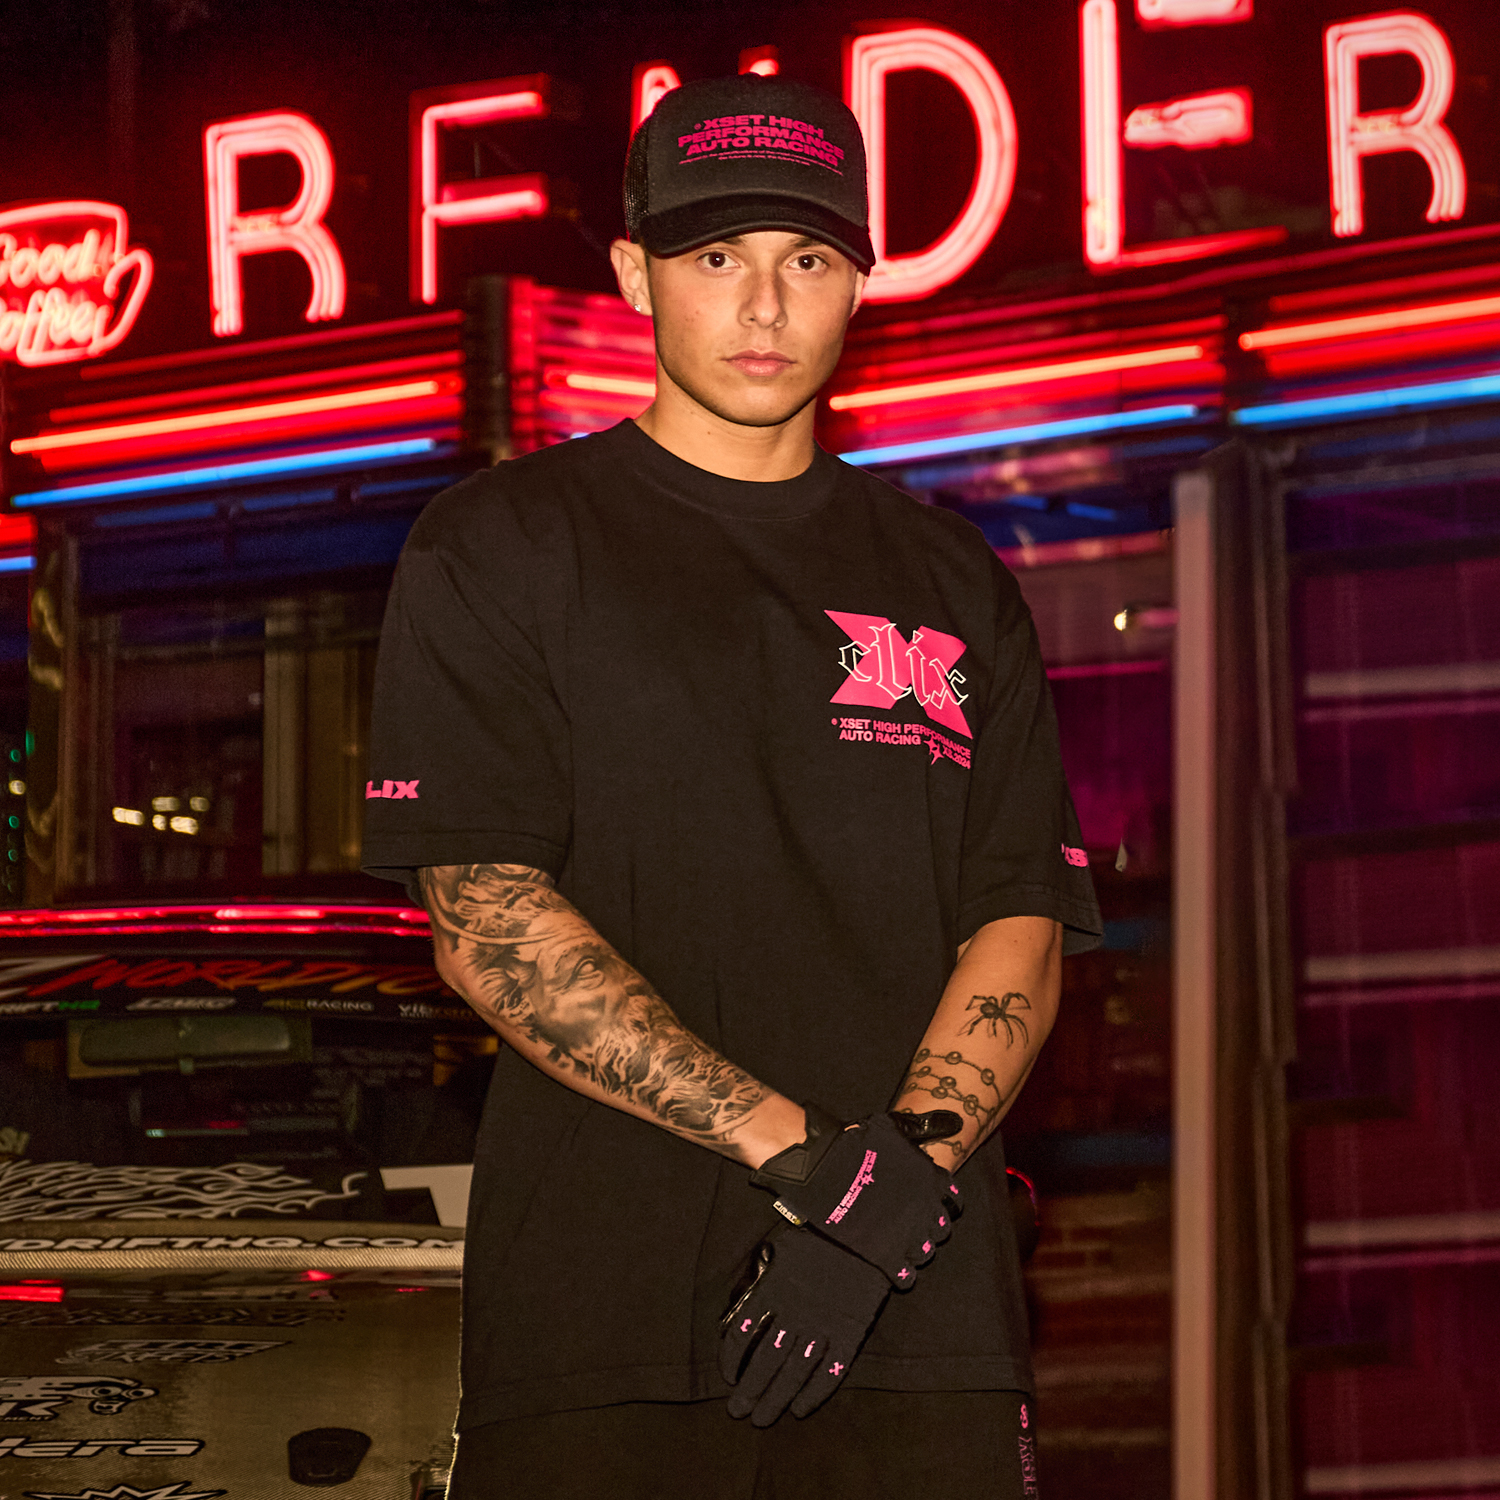 Person wearing black logo t-shirt, matching cap, and gloves, posing with tattooed arms crossed in front of neon lights